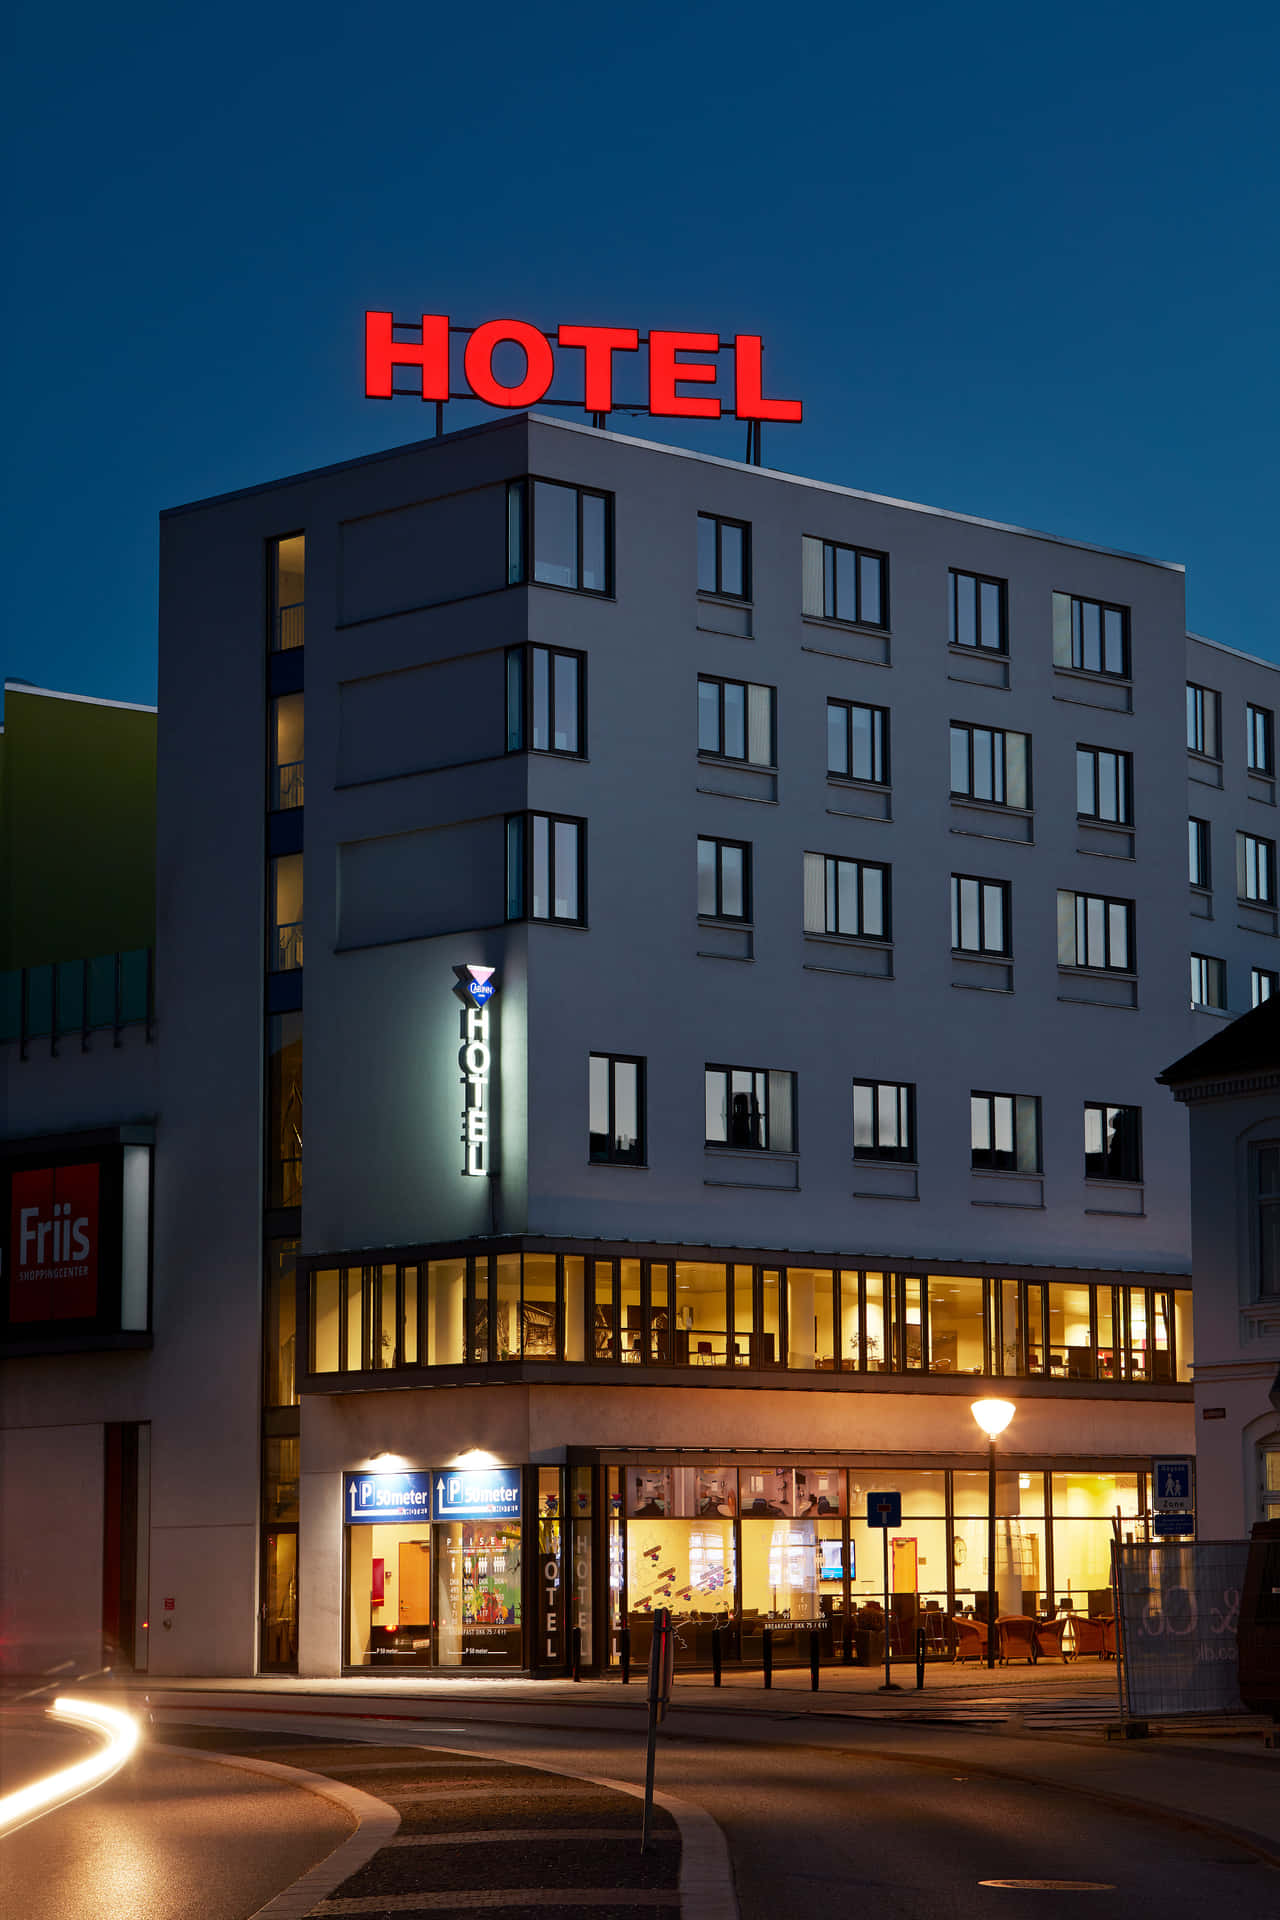 A Hotel Building With A Sign